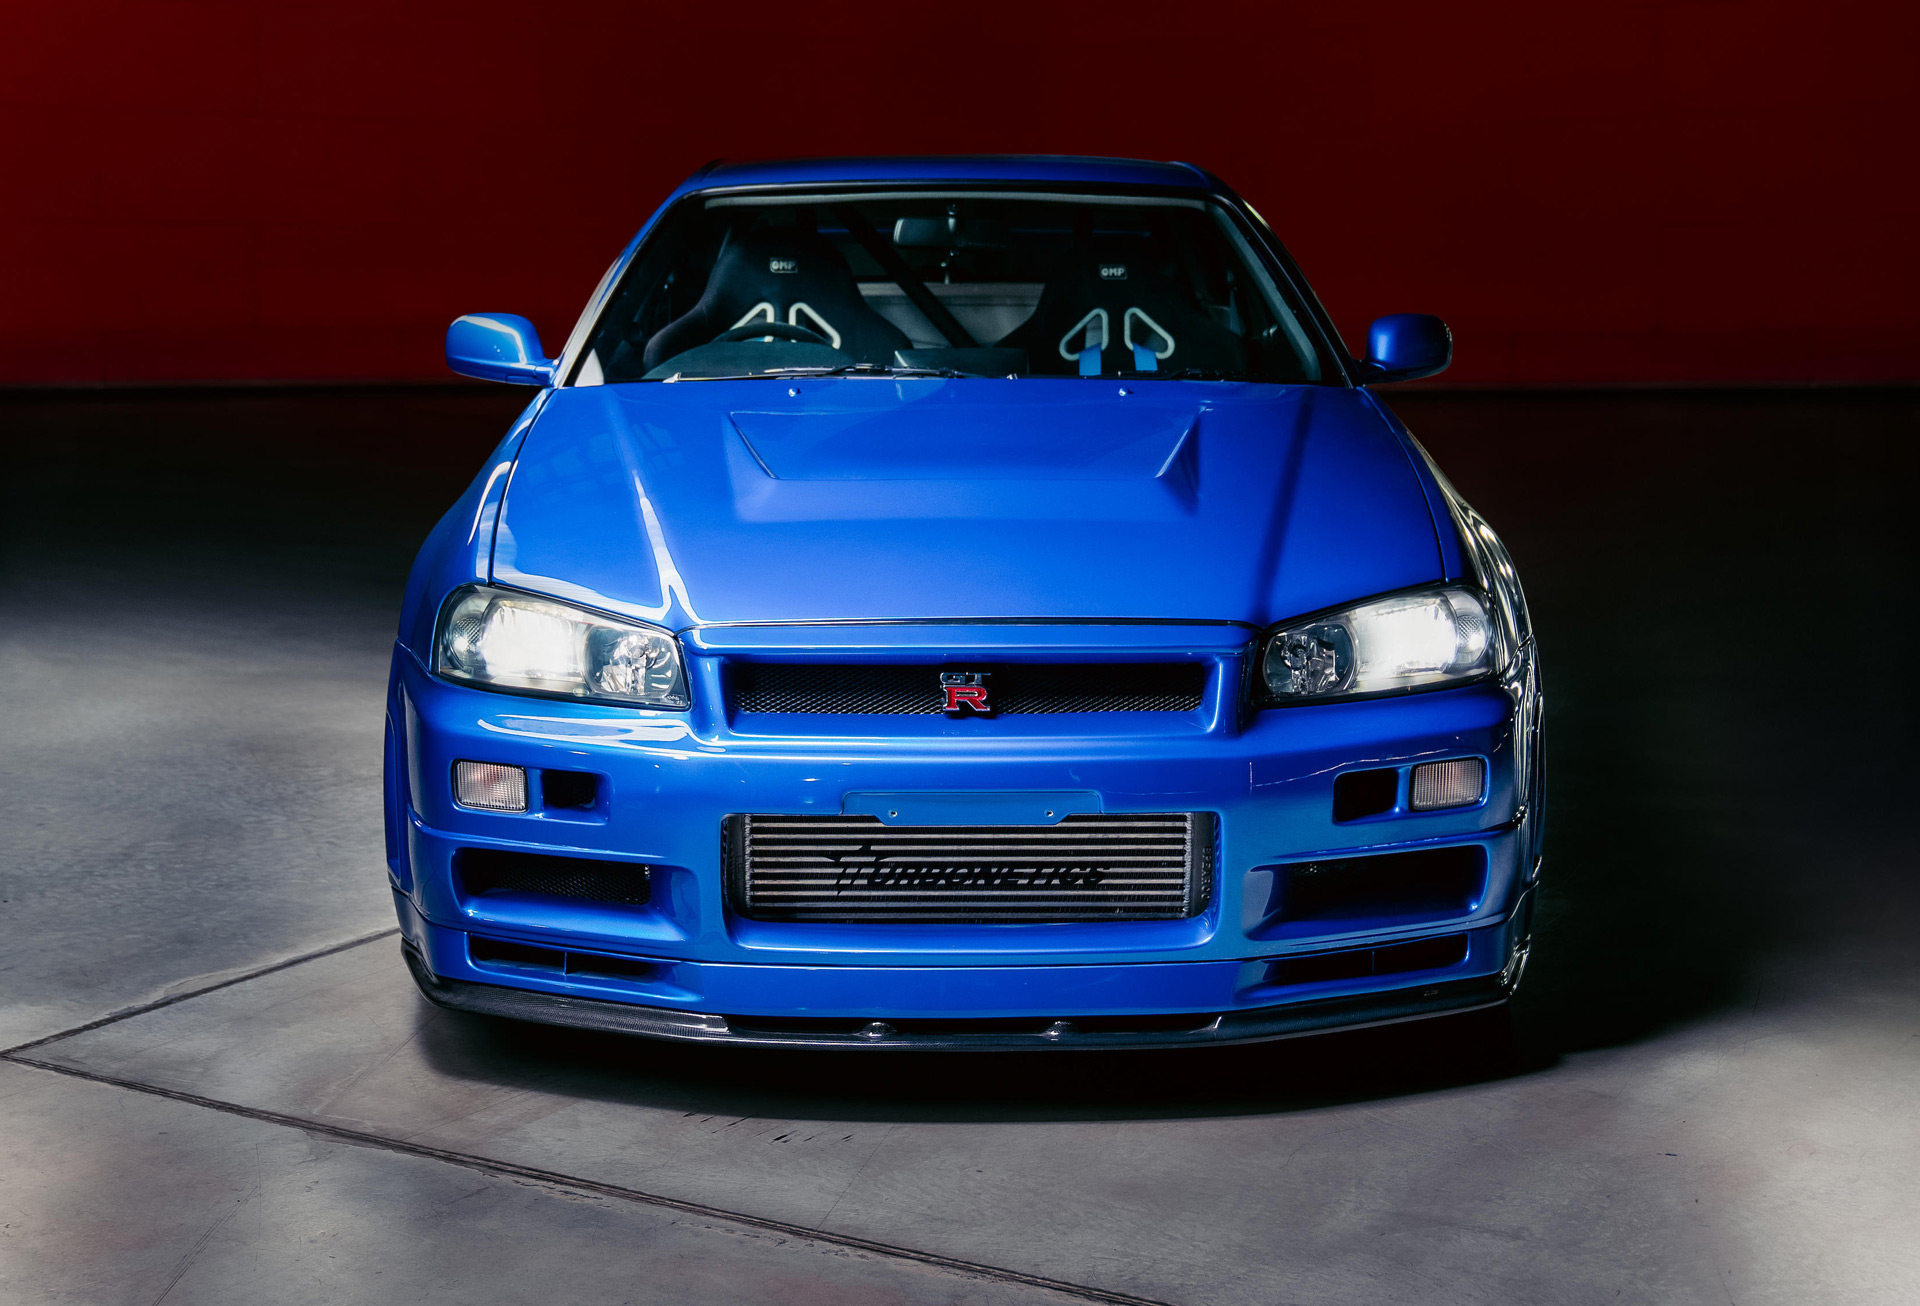 https://images.hgmsites.net/hug/r34-nissan-skyline-gt-r-from-fast-and-furious-4--photo-credit-bonhams_100879630_h.jpg